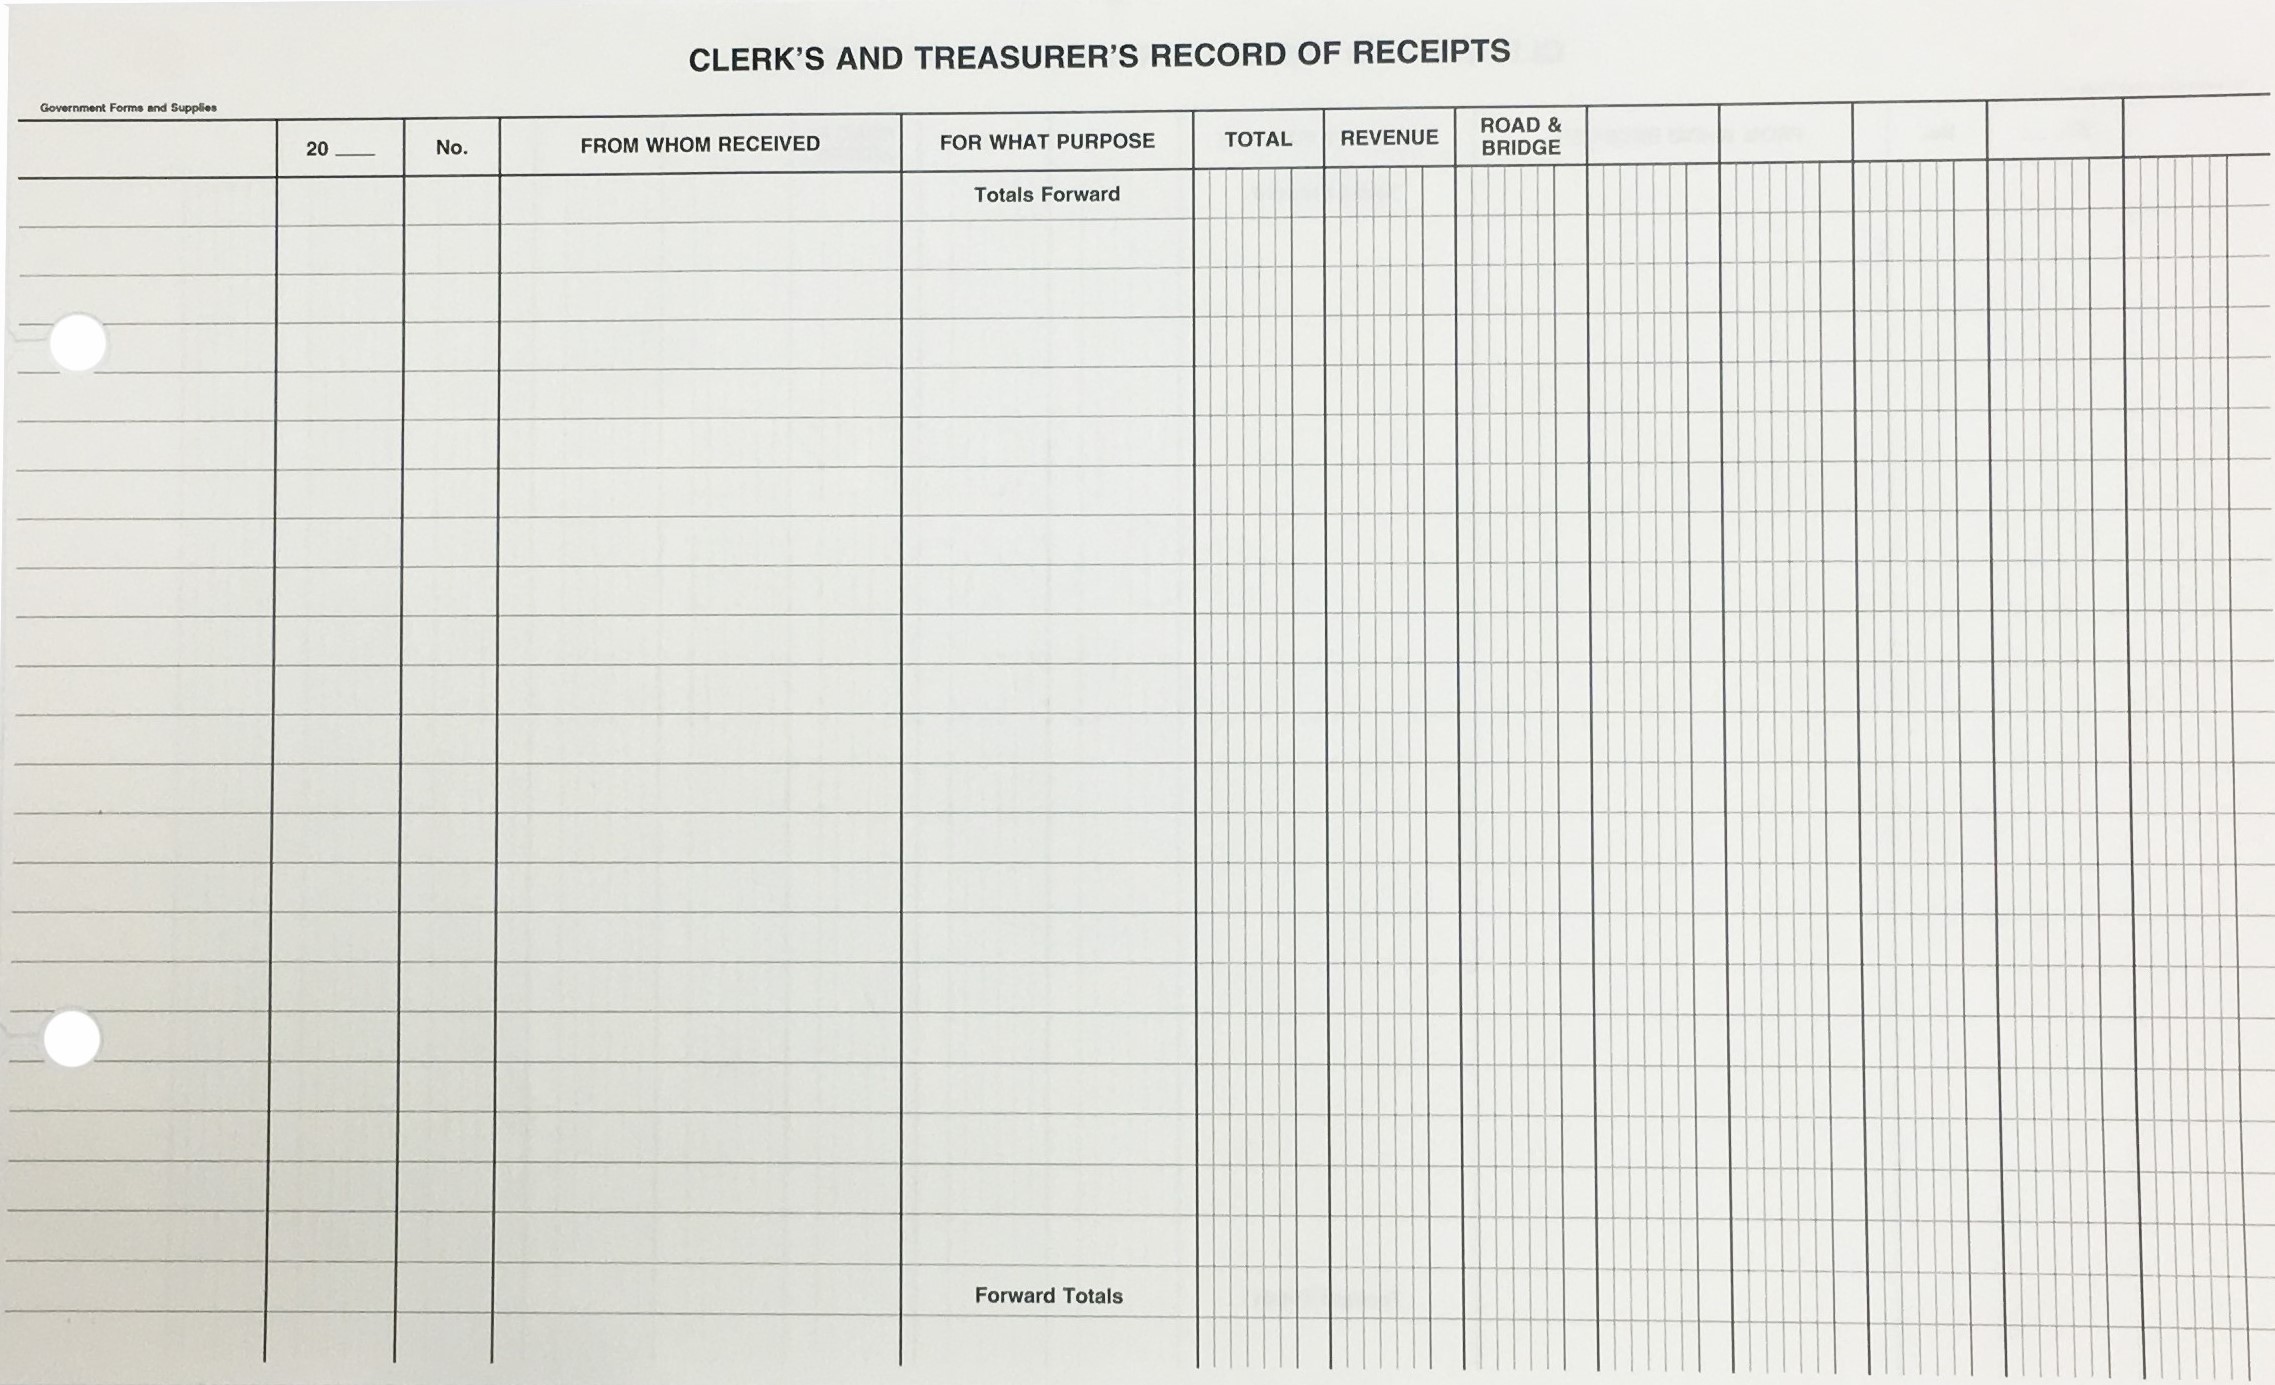 Township Record of Receipts